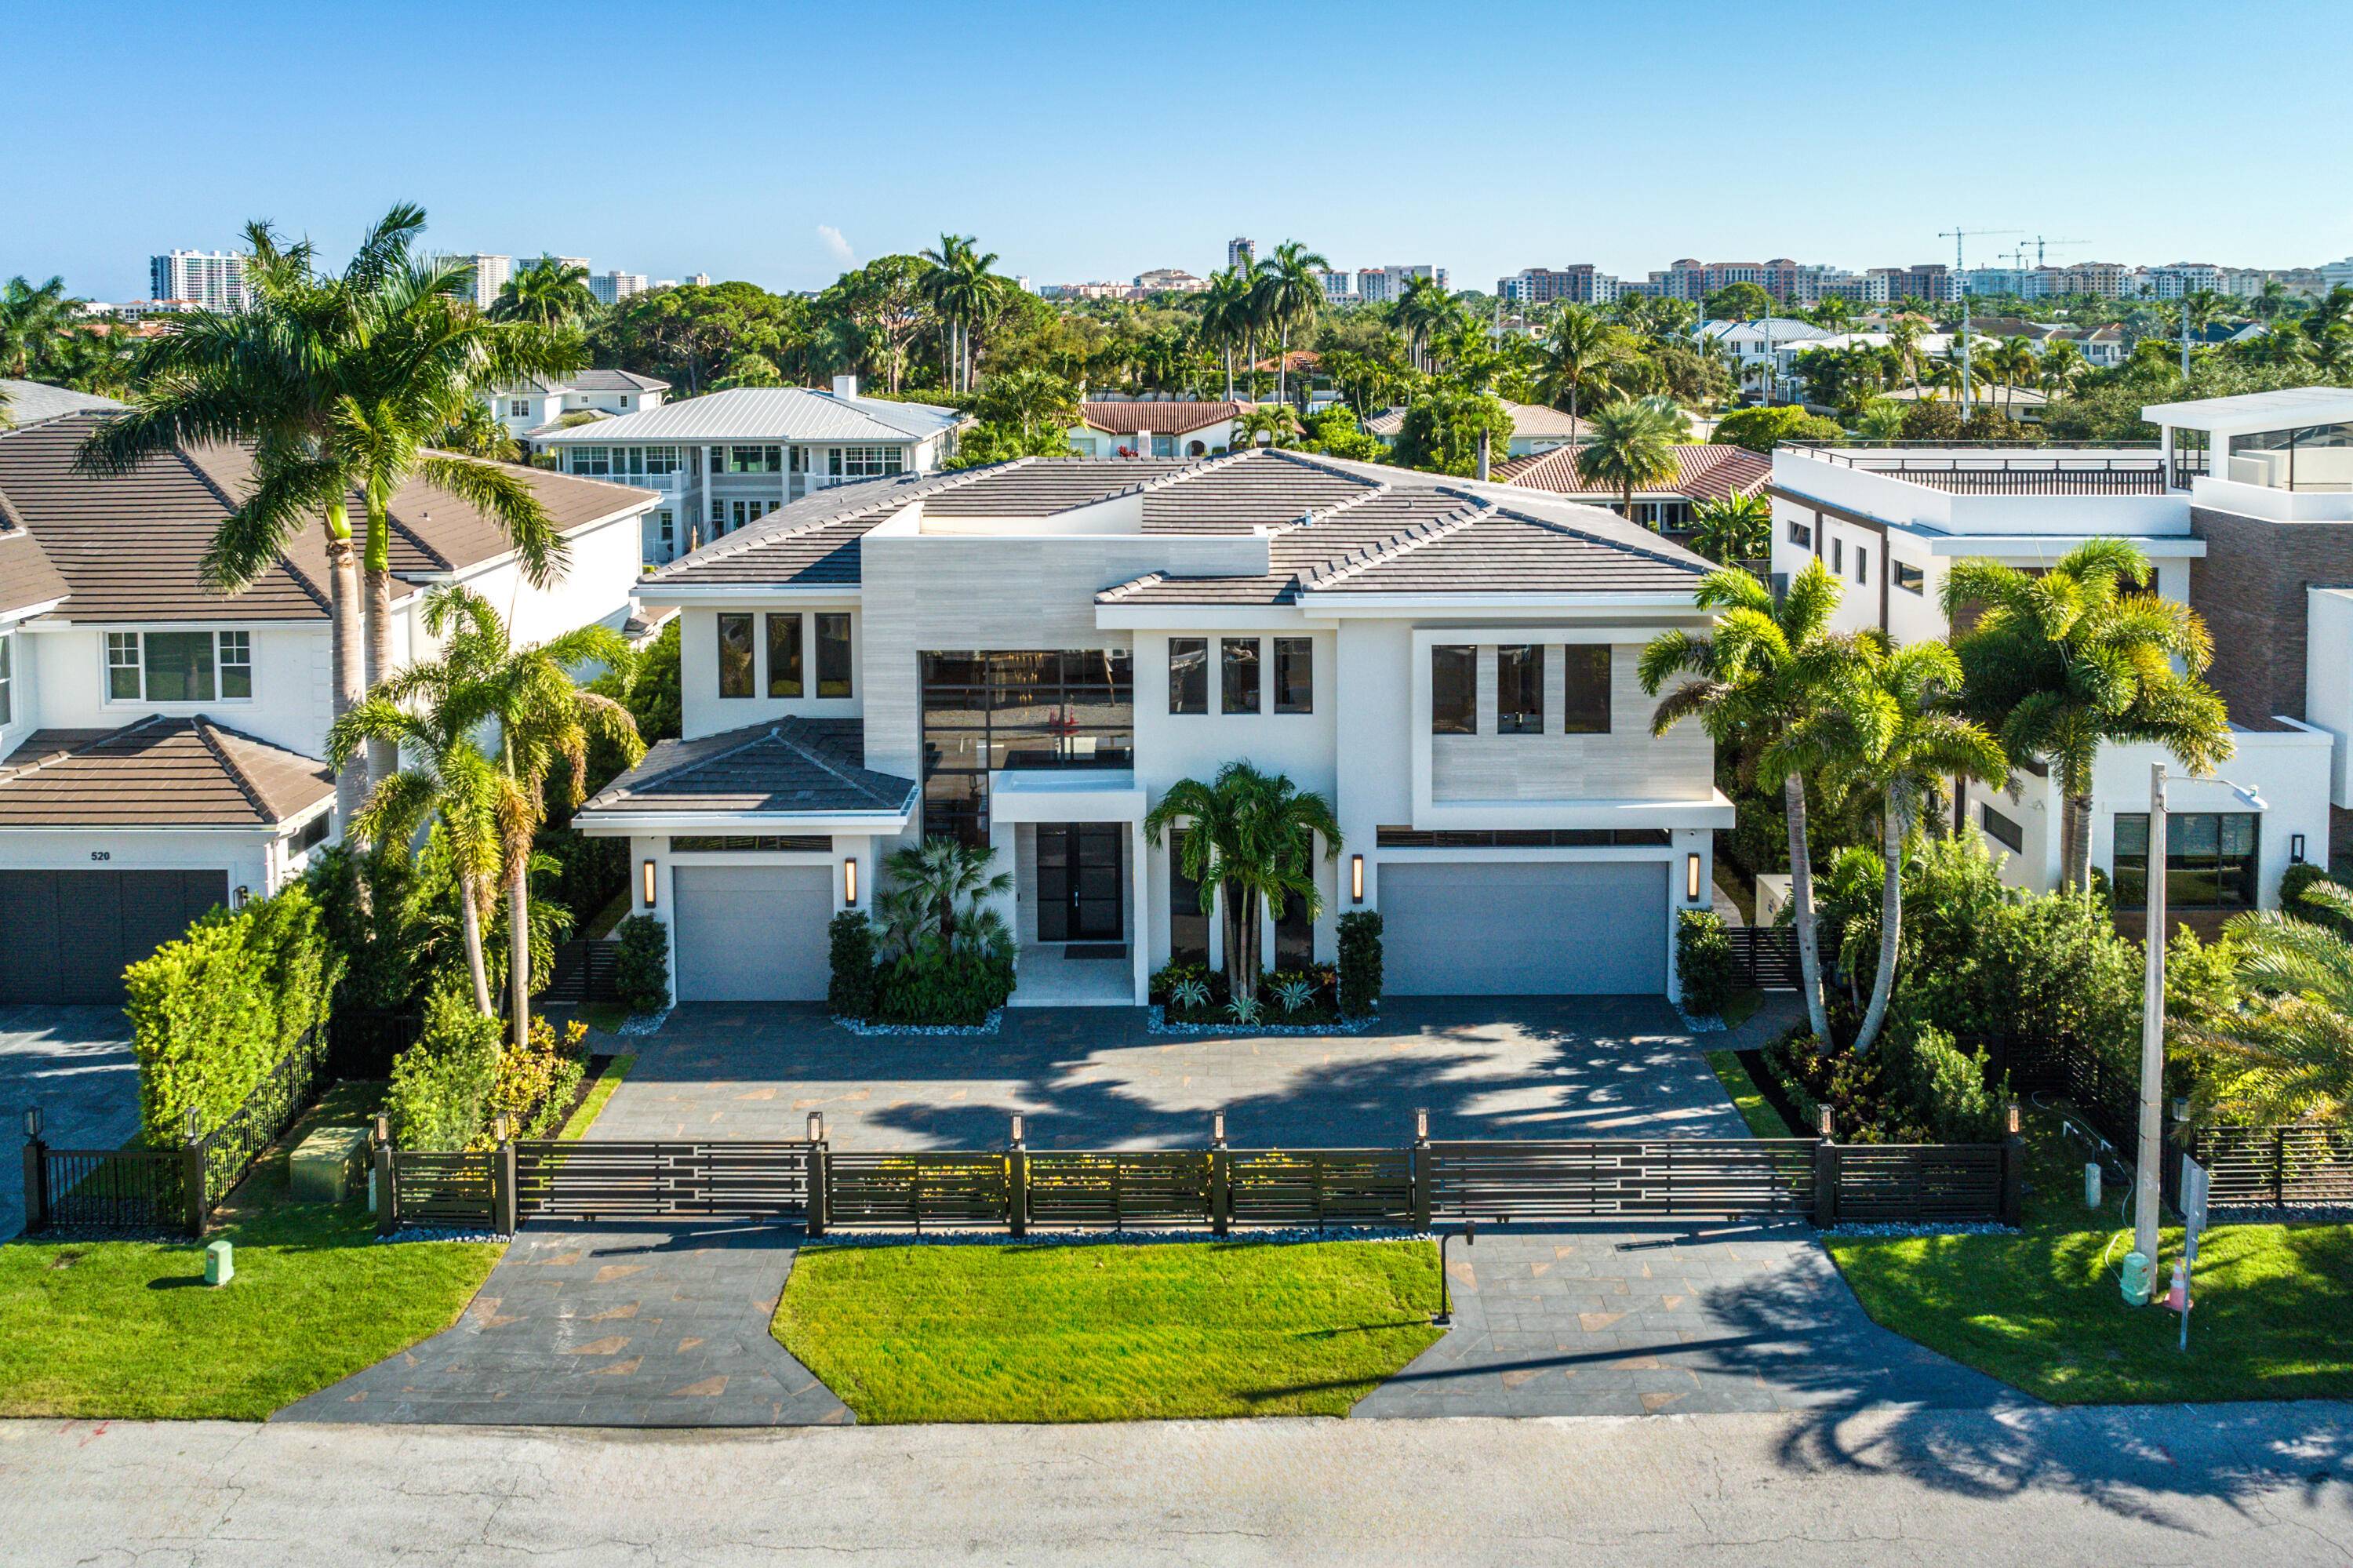 Absolutely Exquisite. Developed by Alpha Premium Development, Five Ten Kay Terrace is ideally located in Boca's famed Golden Harbour neighborhood, on a deepwater canal.